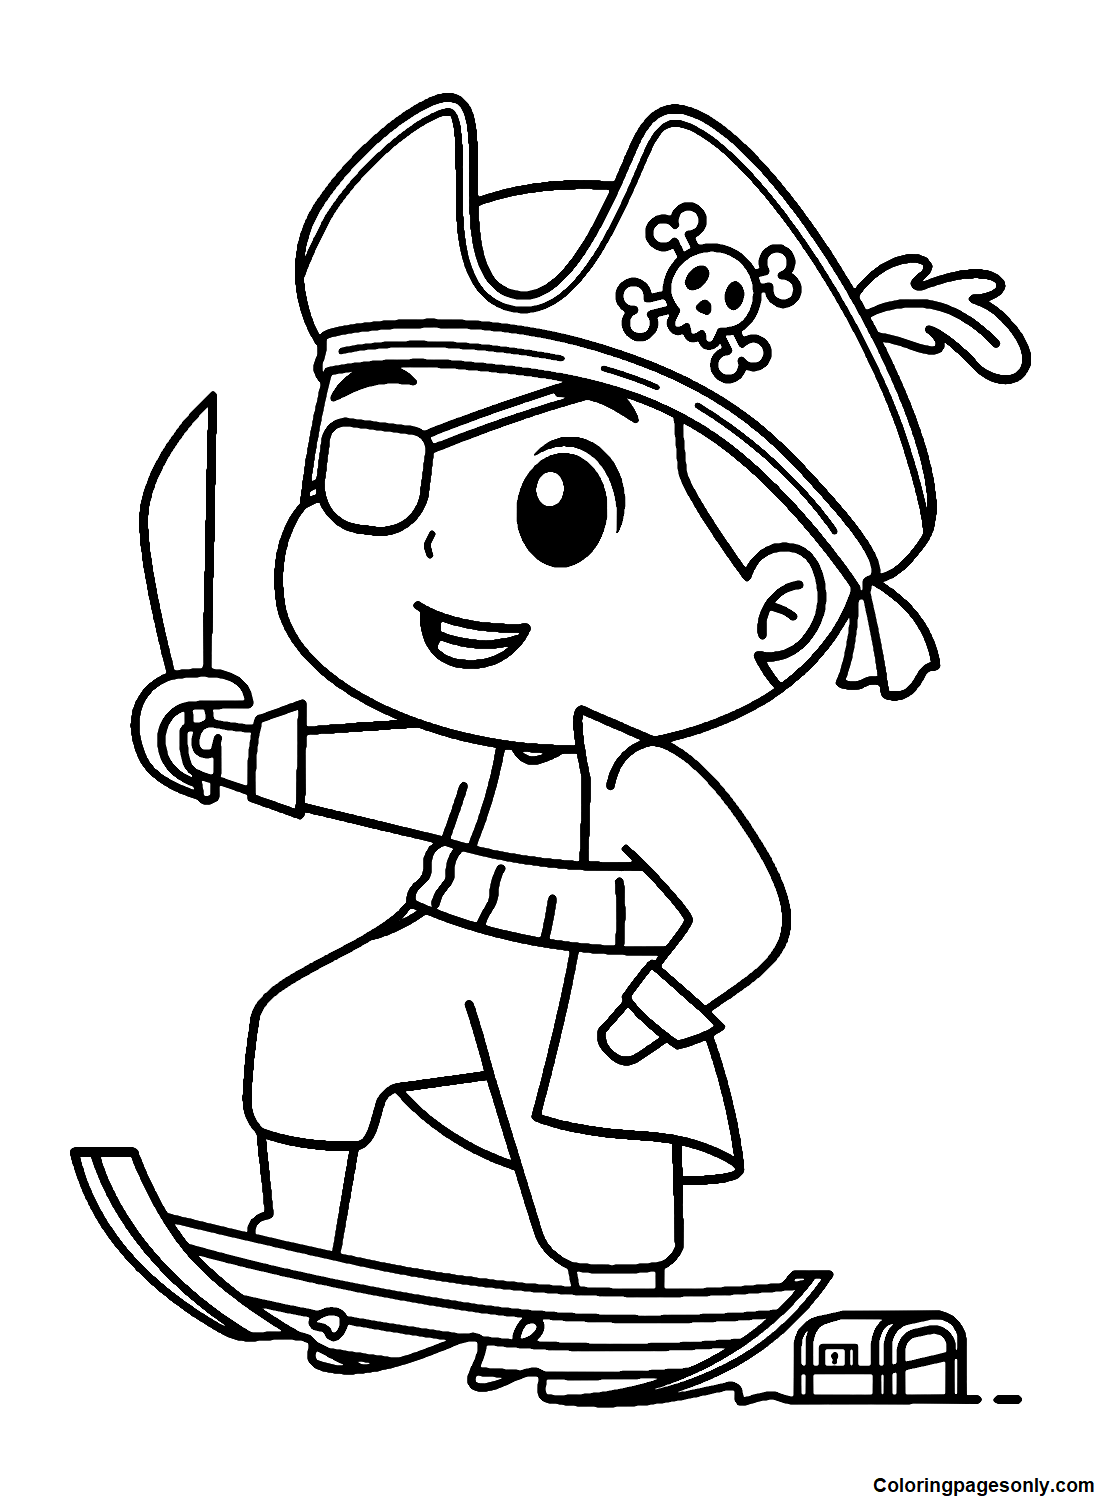 Cute Pirate Boy Coloring Page